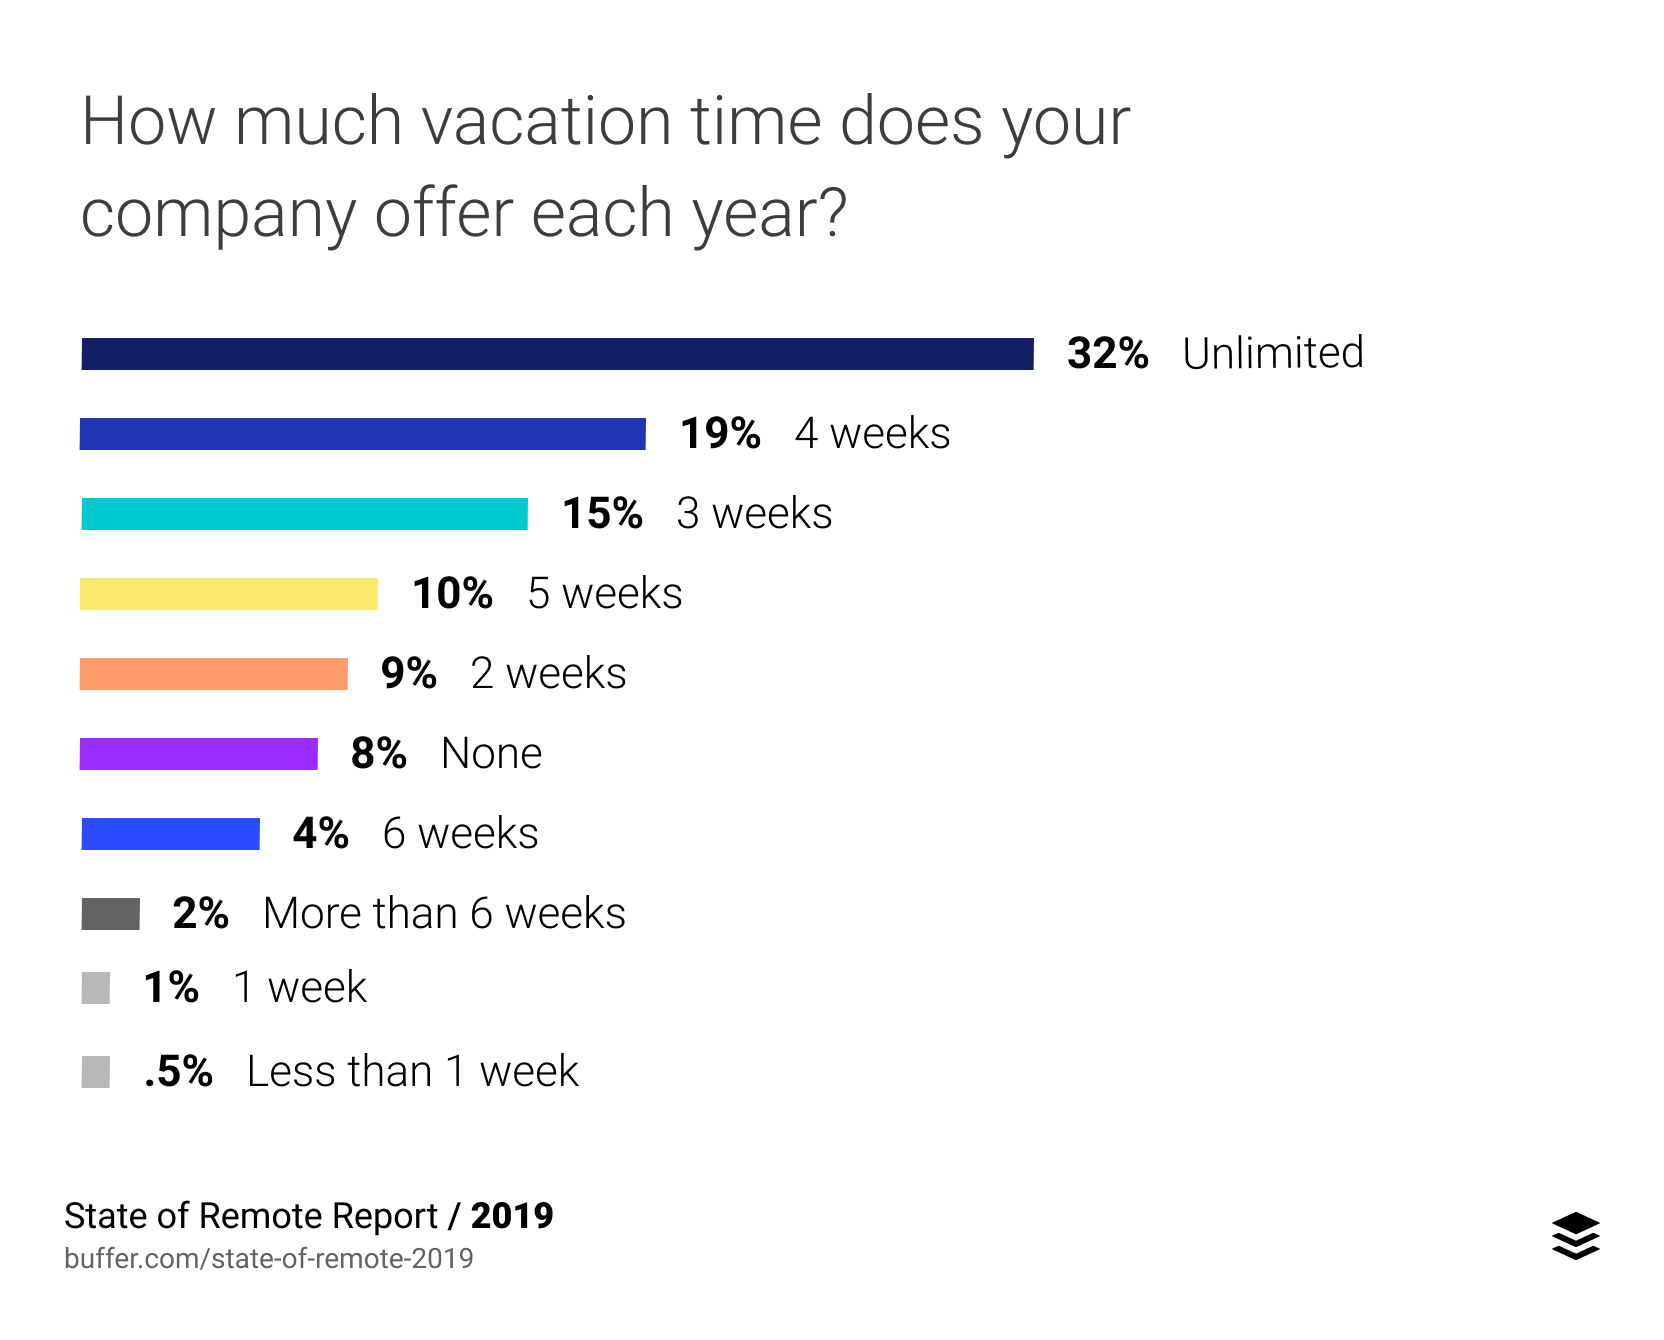 How much vacation time does your company offer each year?